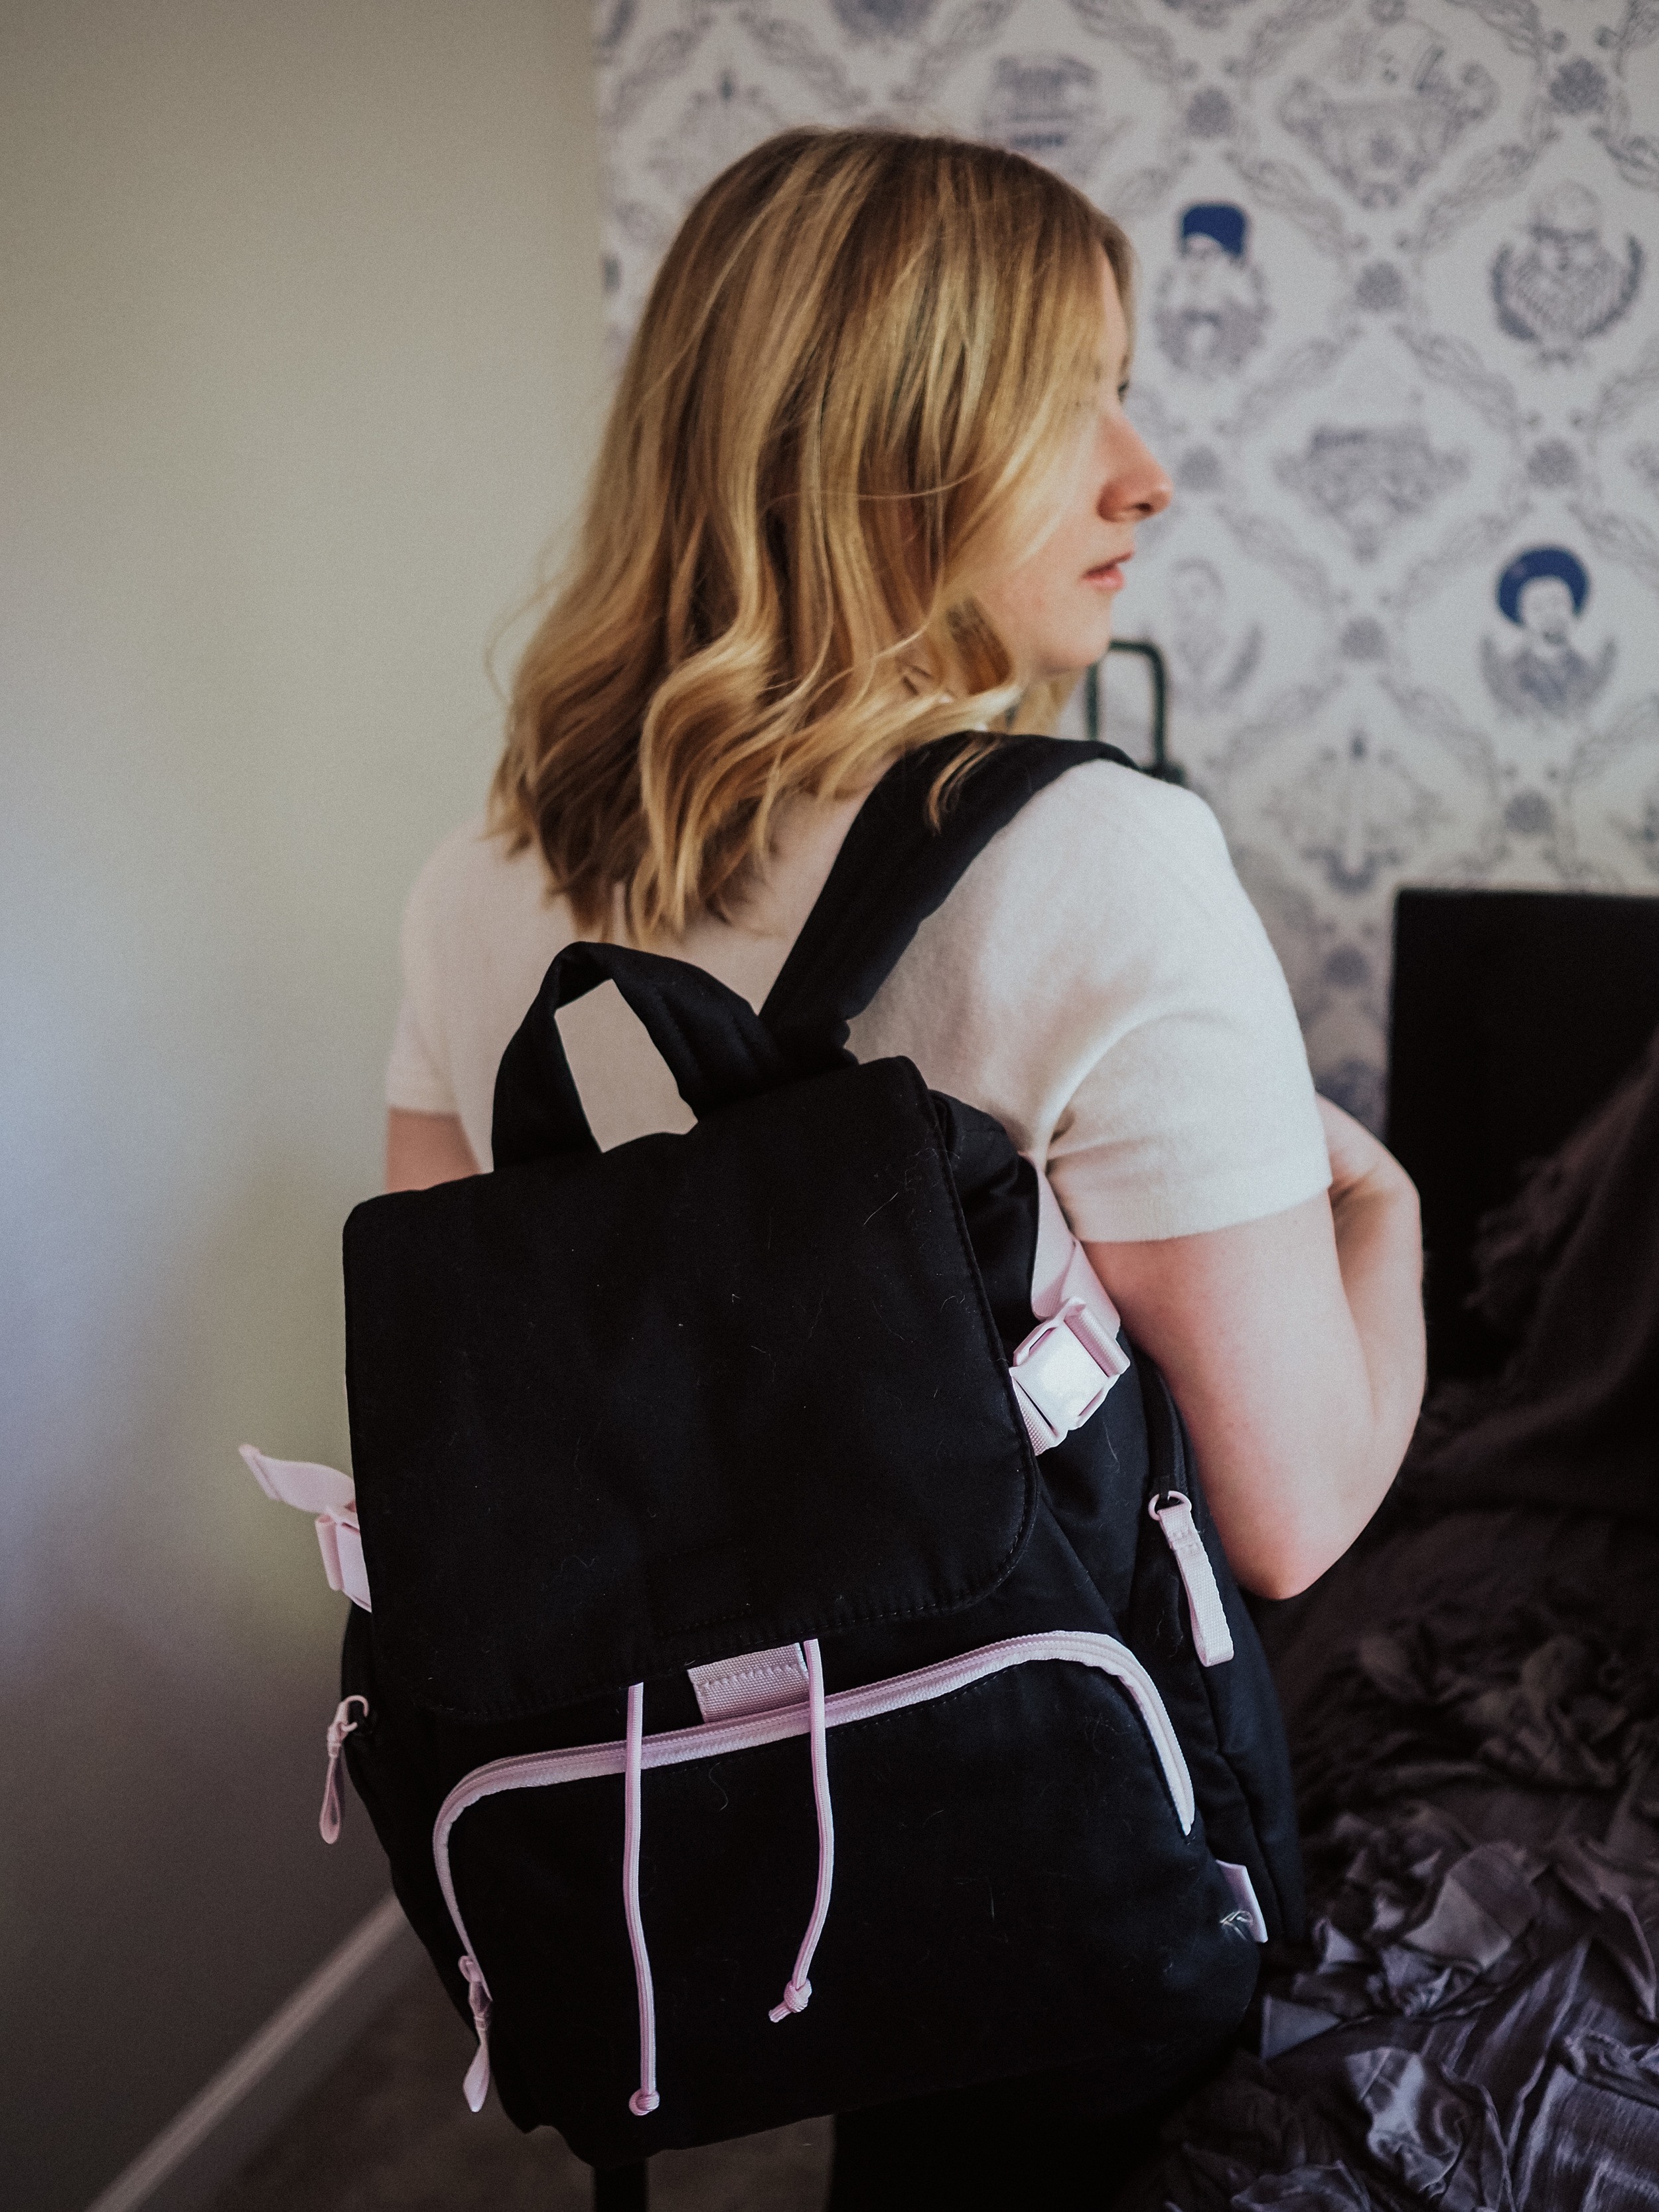 Kelsey from Blondes & Bagels reviews the best backpacks for women. These backpacks are comfortable, affordable, and durable.